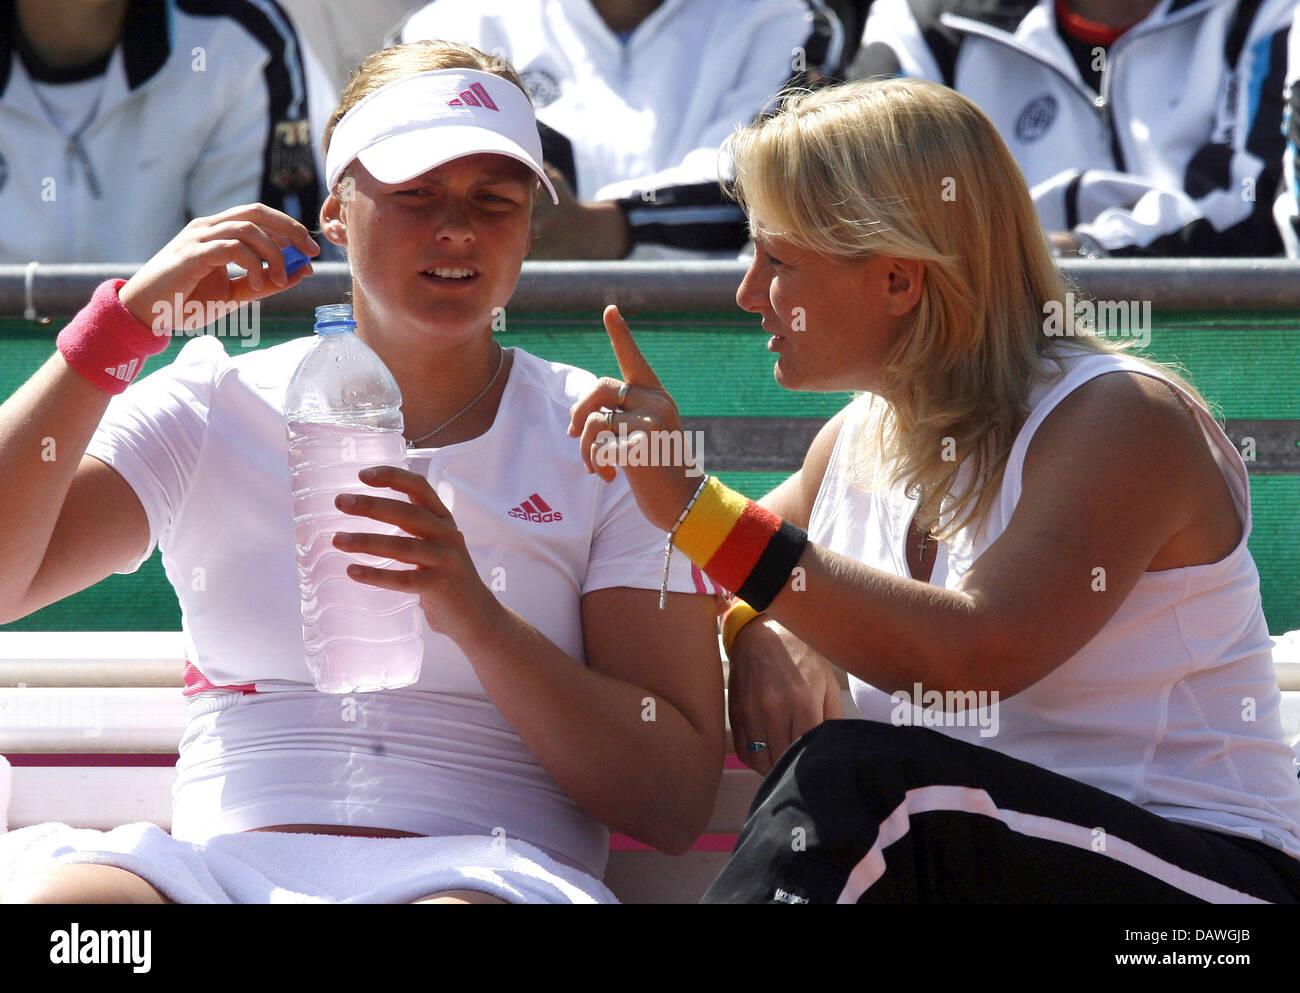 German tennis pro Anna-Lena Groenefeld (L) is coached by her Team Captain Barbara Rittner during the FedCup 1st Round match German v Croatia in Fuerth, Germany, 21 April 2007. Photo: Danuiel Karmann Stock Photo